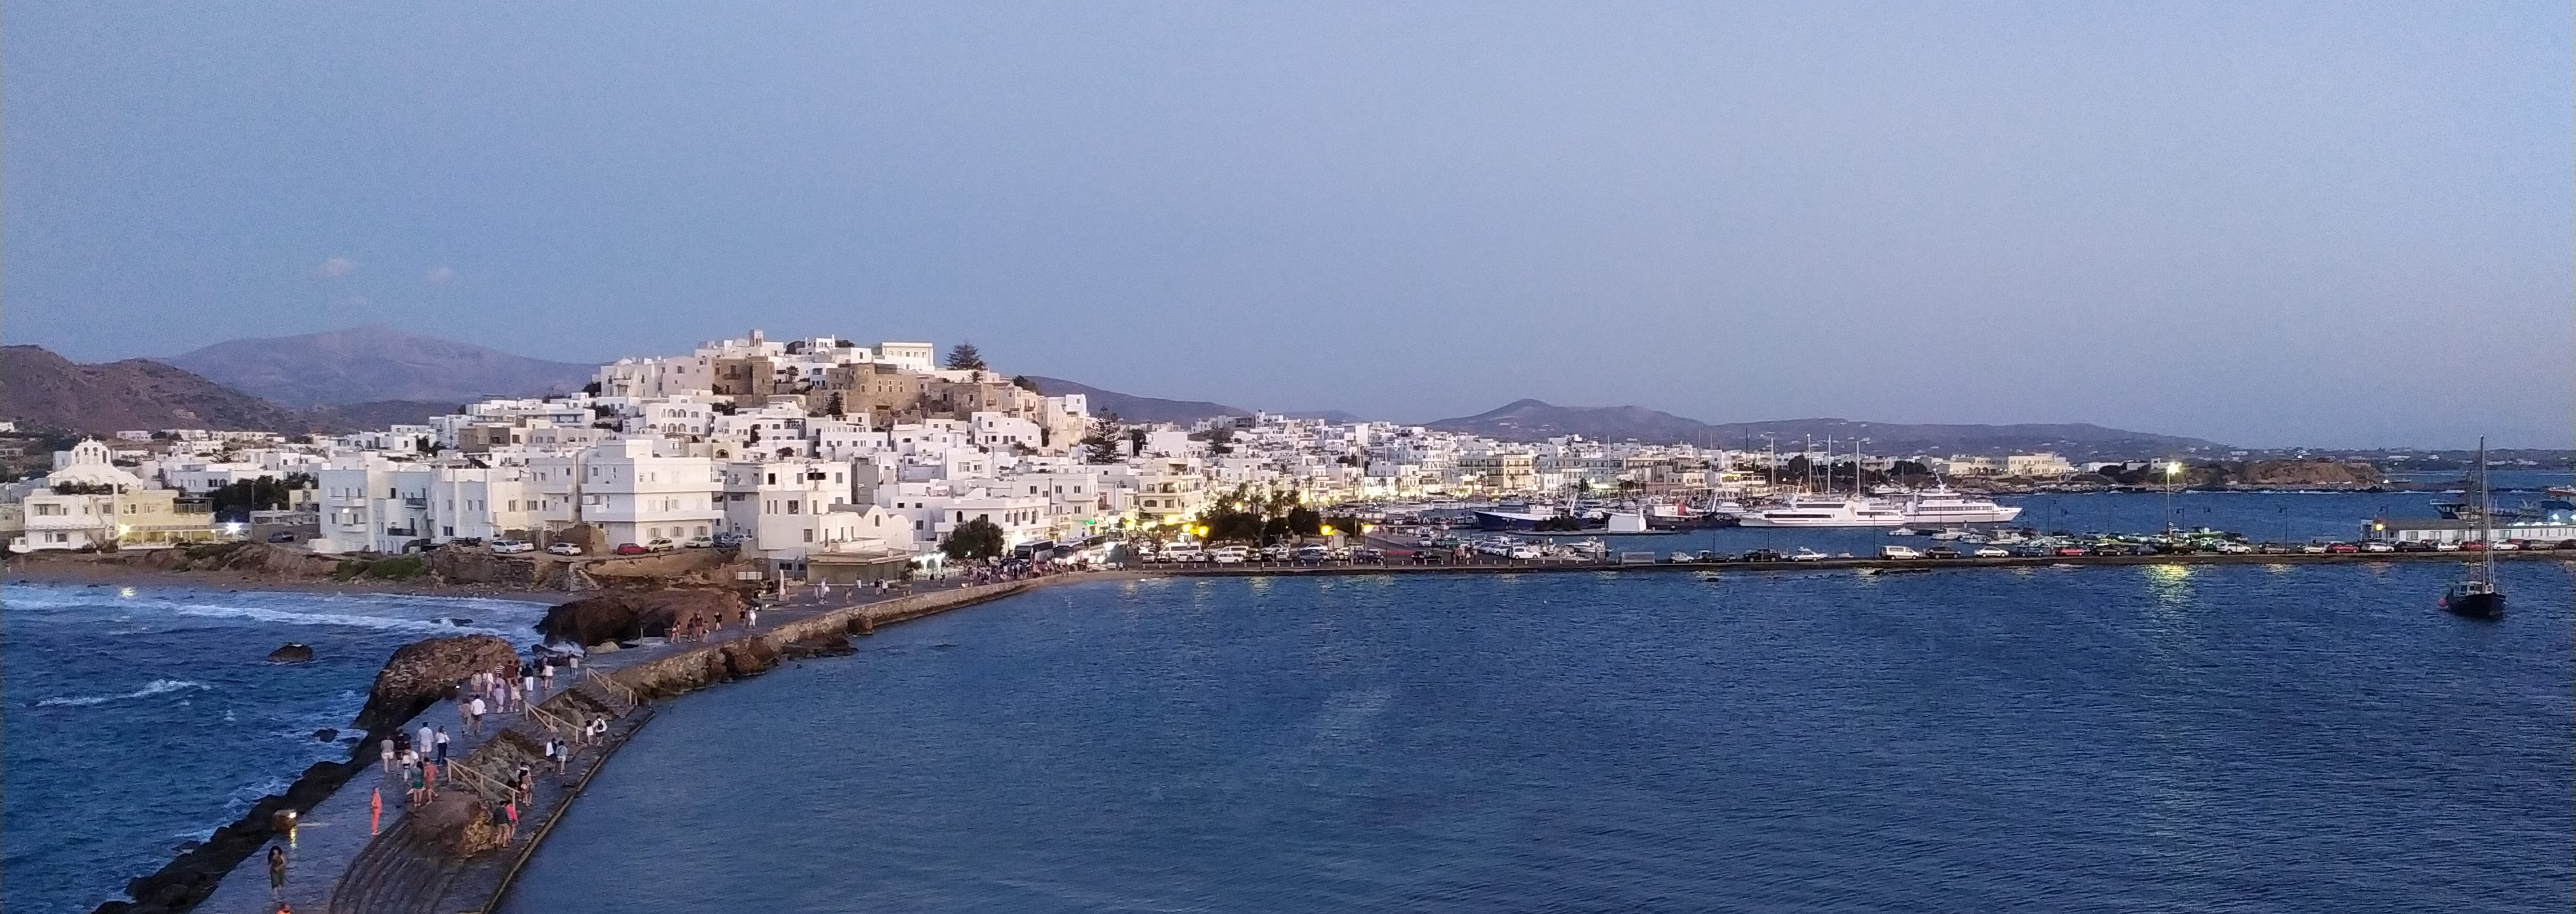 Naxos: the town and its picturesque alleys